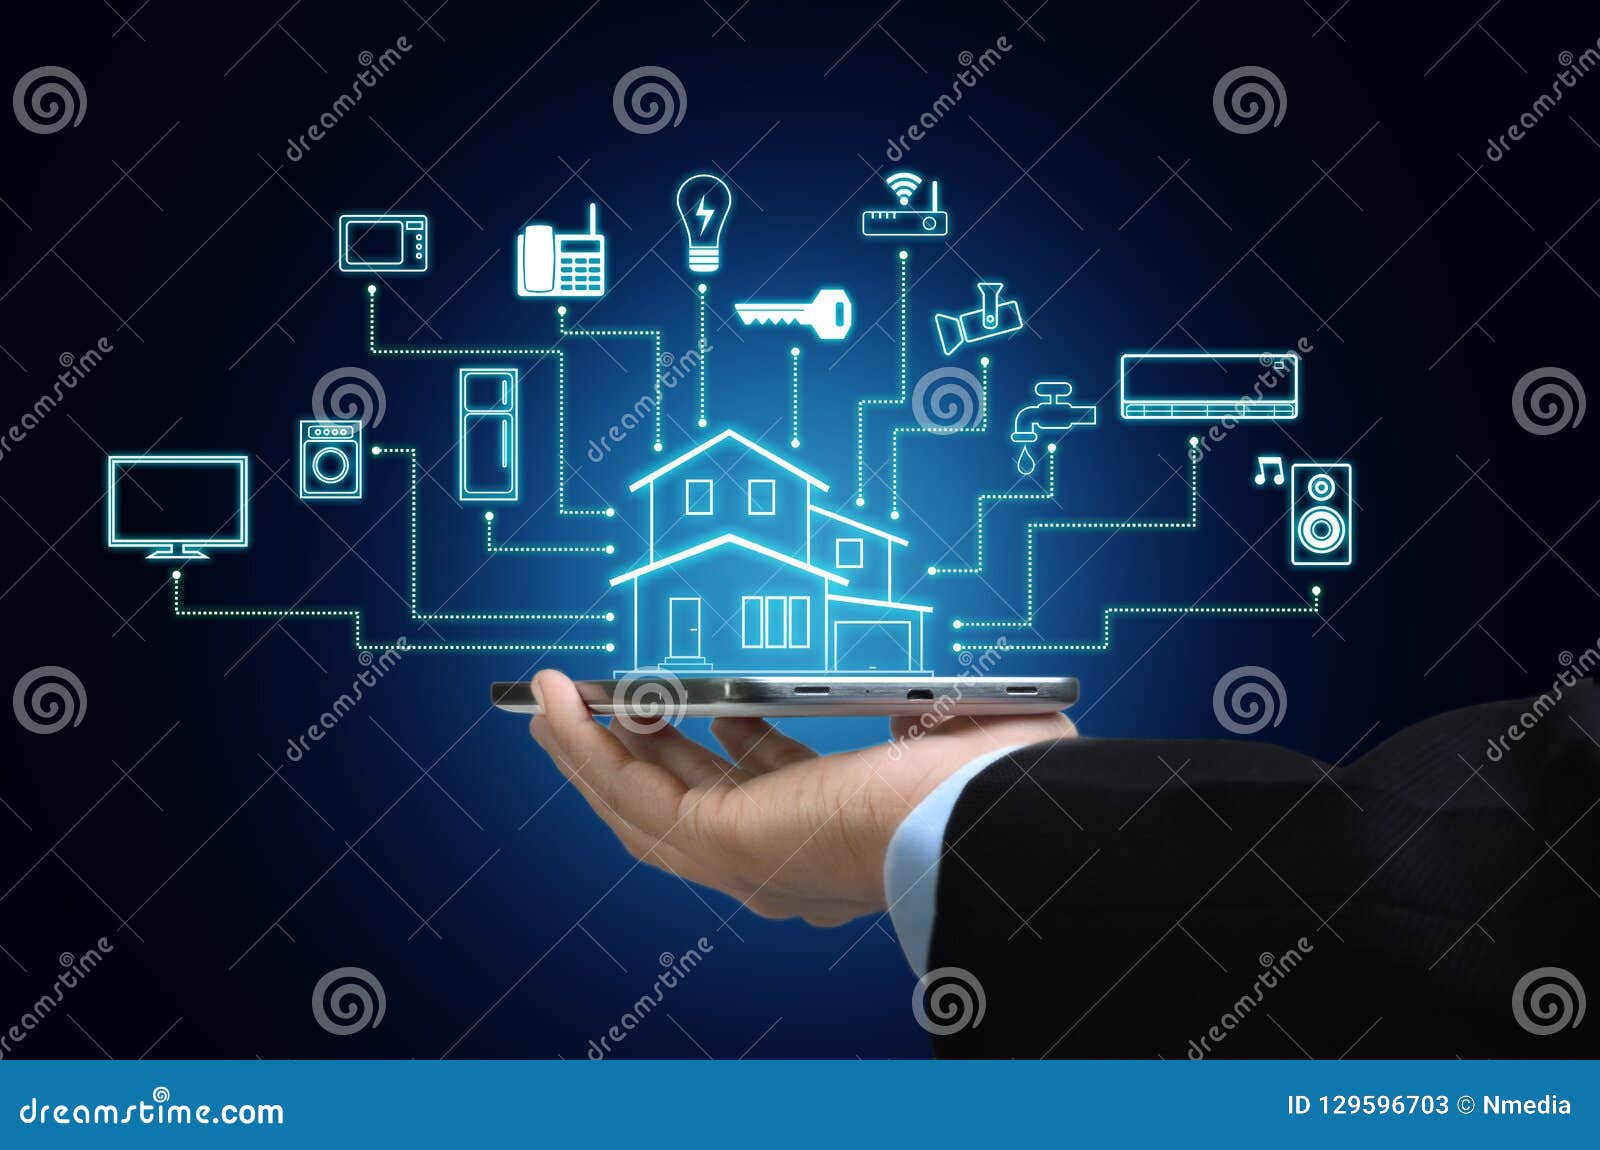 internet of things and smart home concept